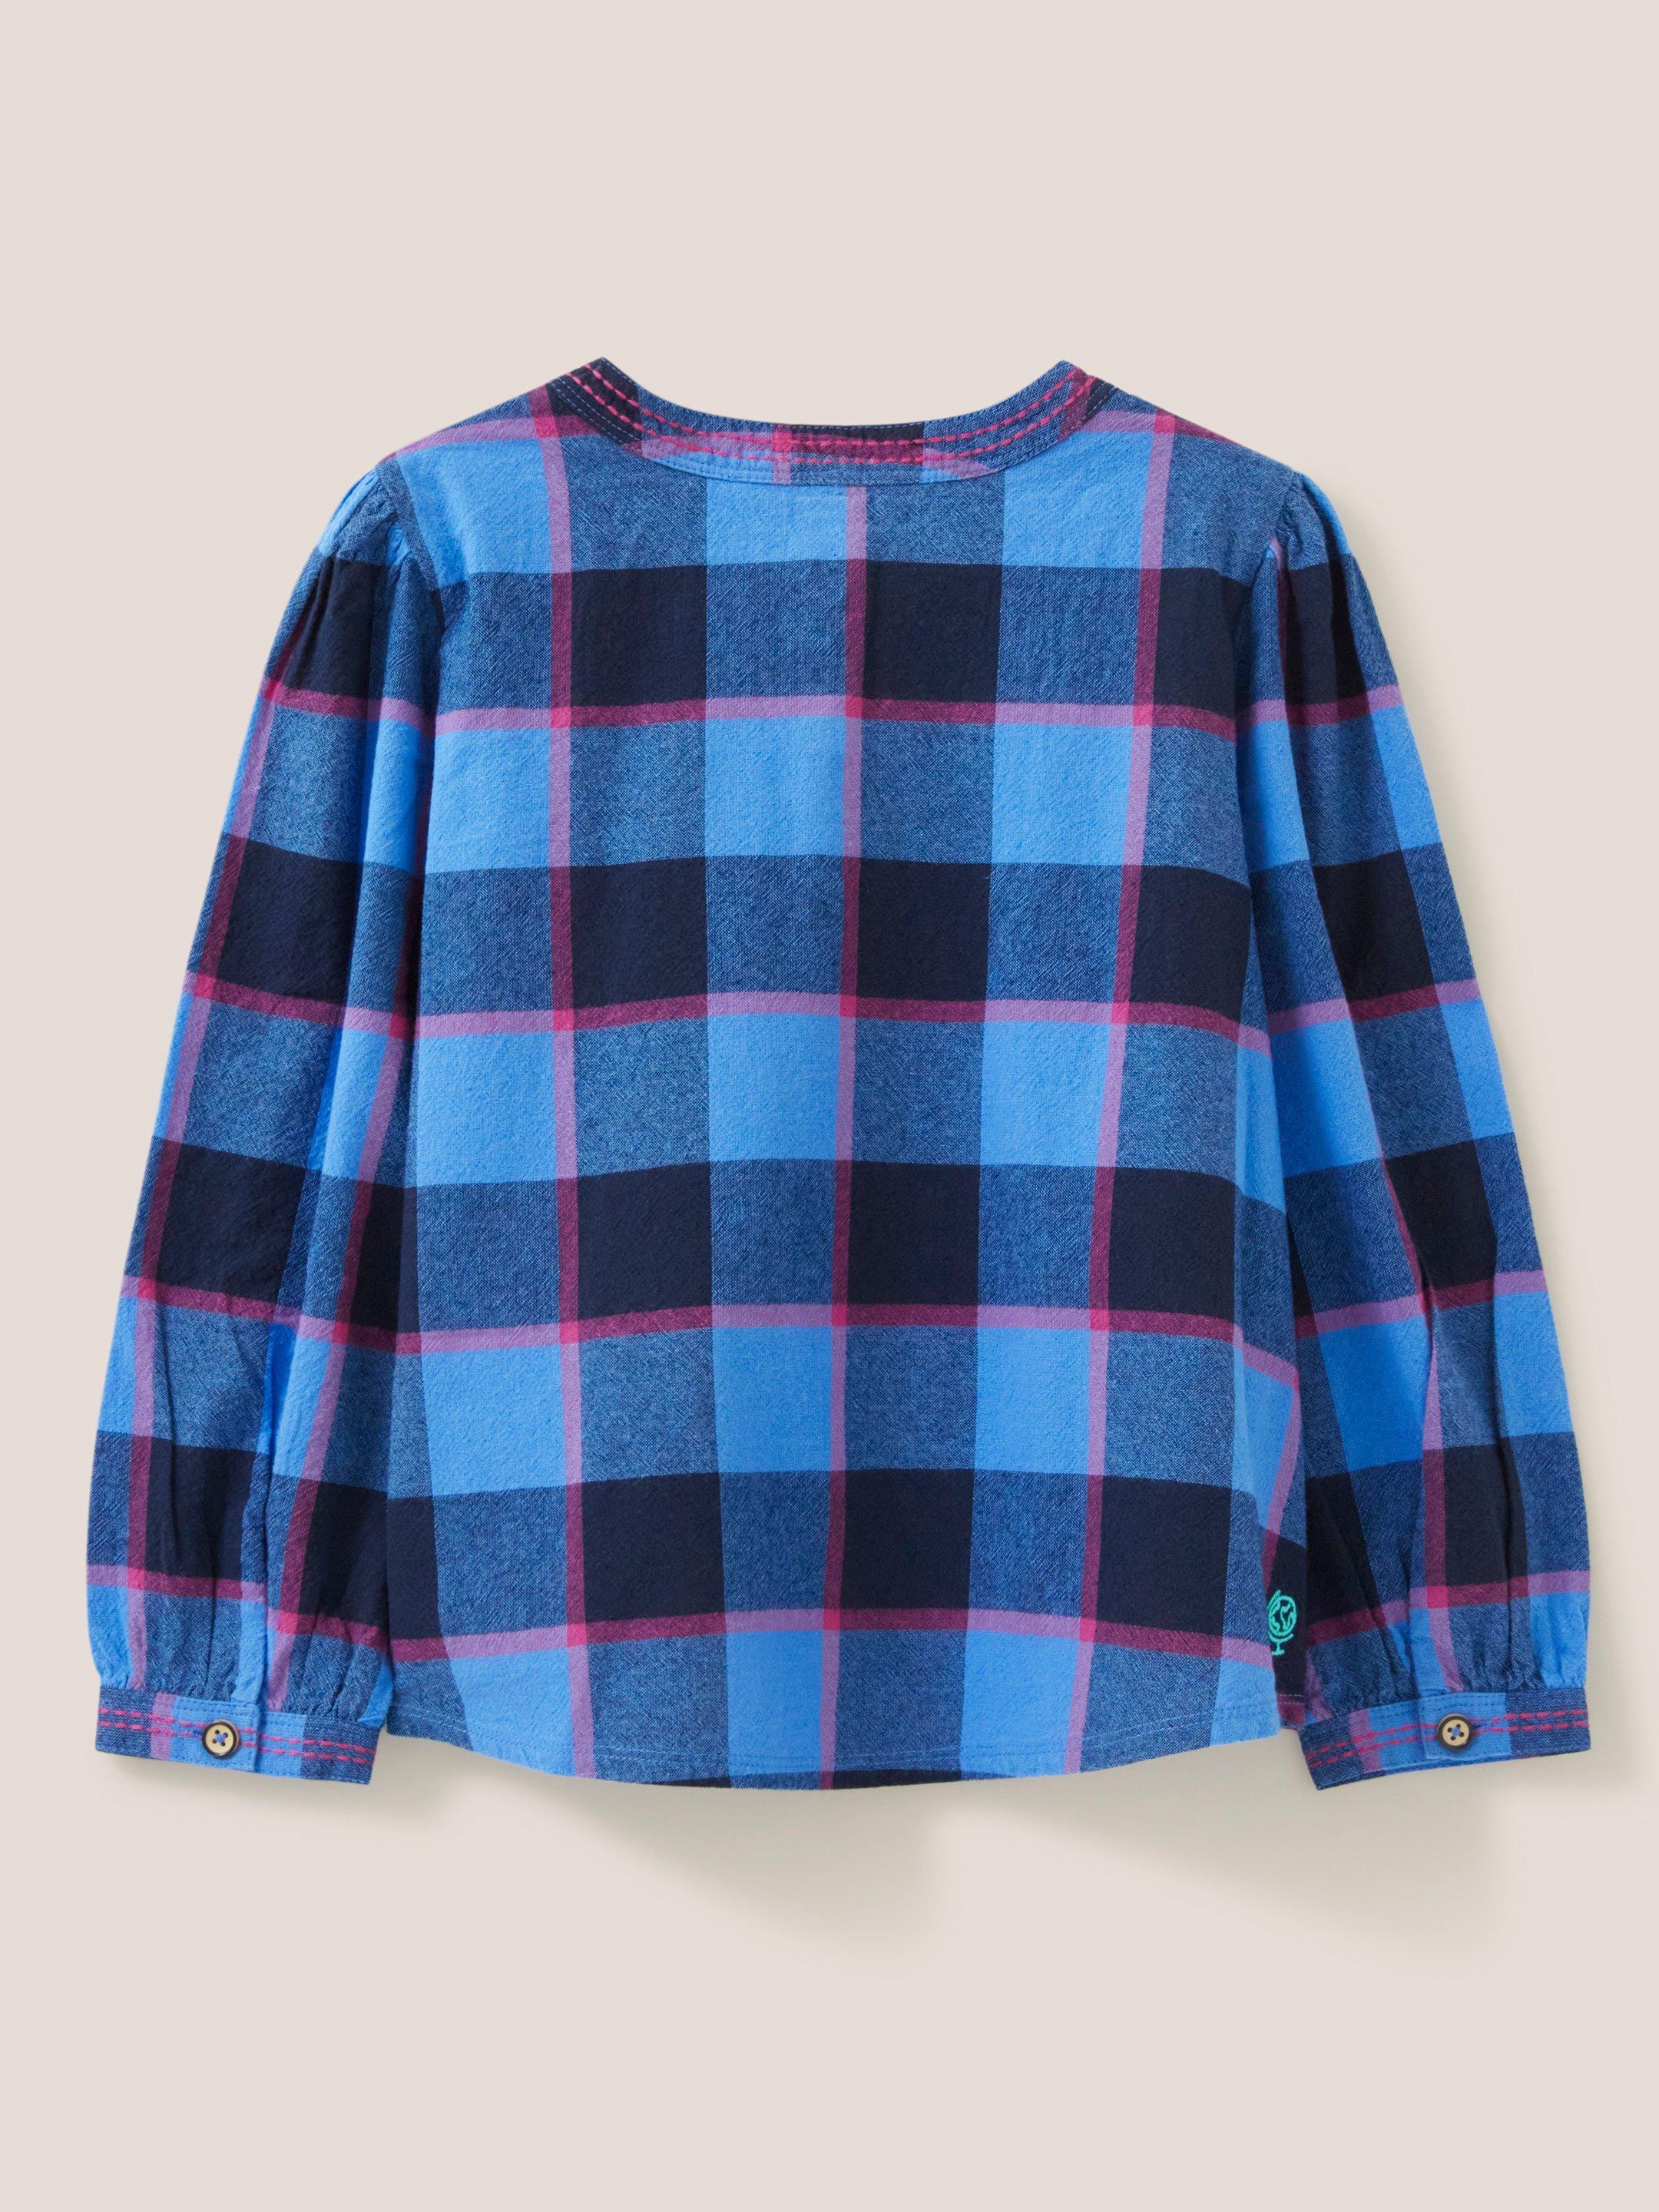 Molly Check Top in BLUE MLT - FLAT BACK